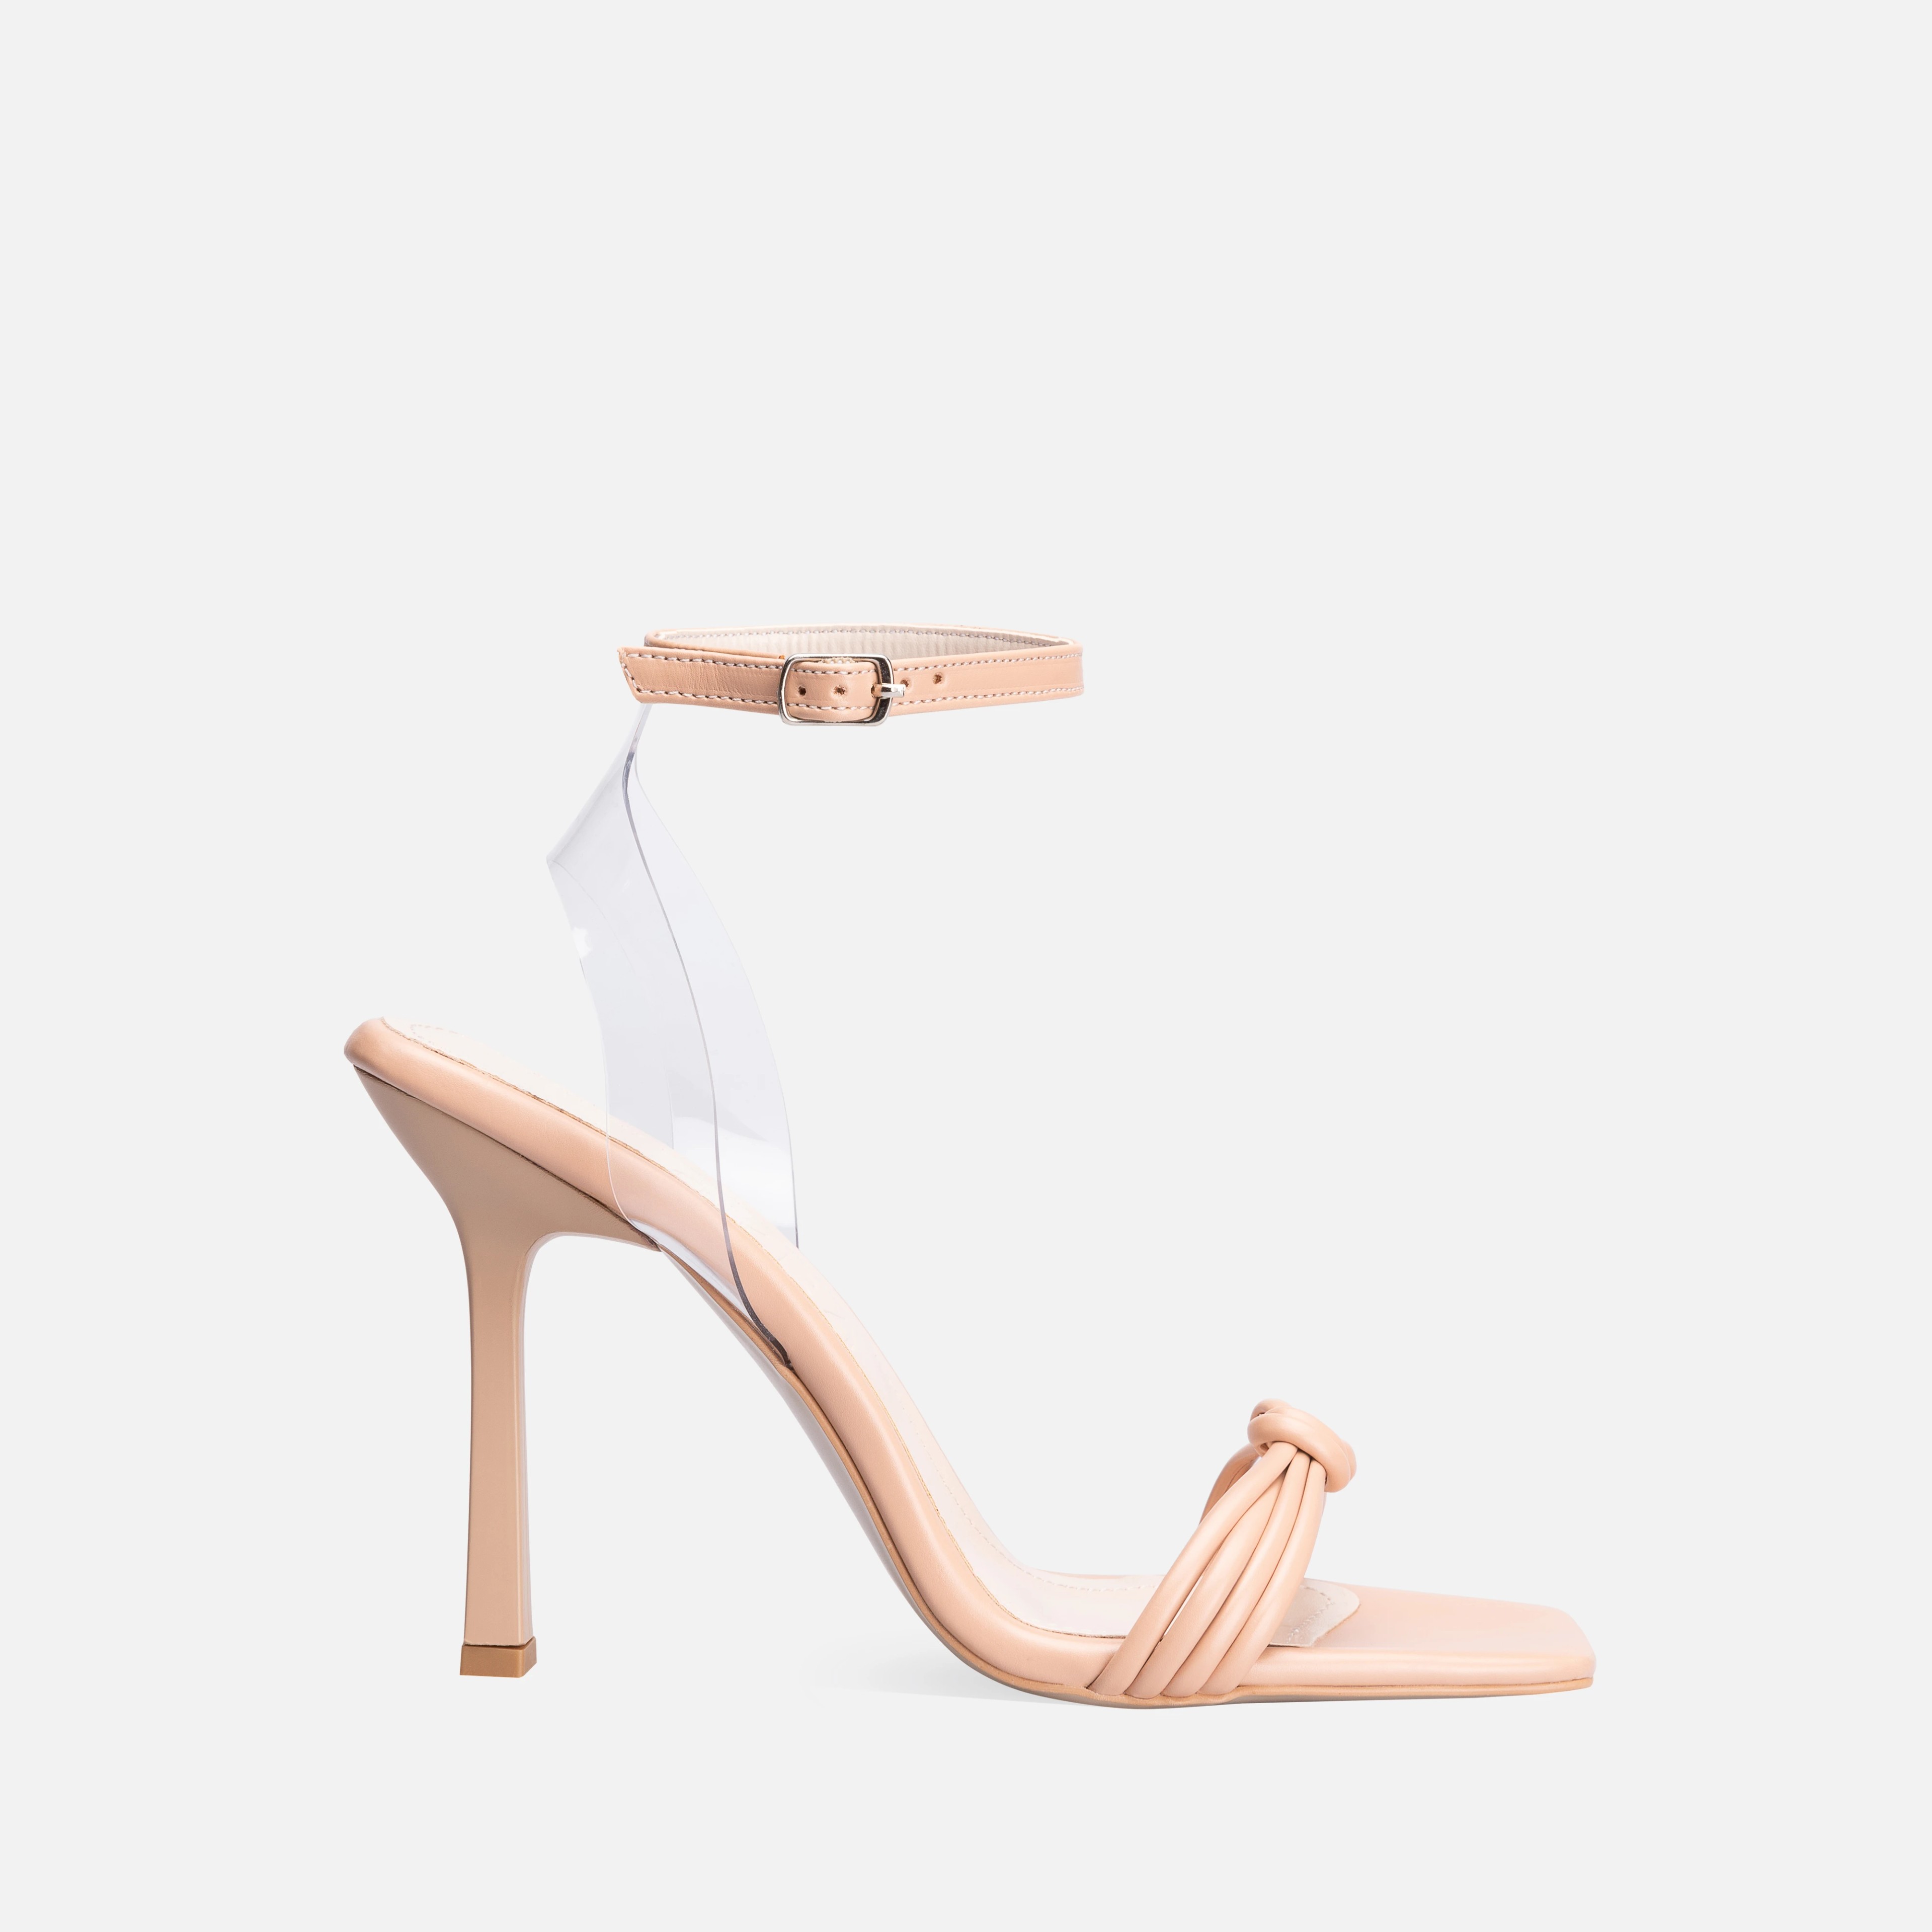 PVC and Faux Leather Thin High-Heeled Shoes - Neutral